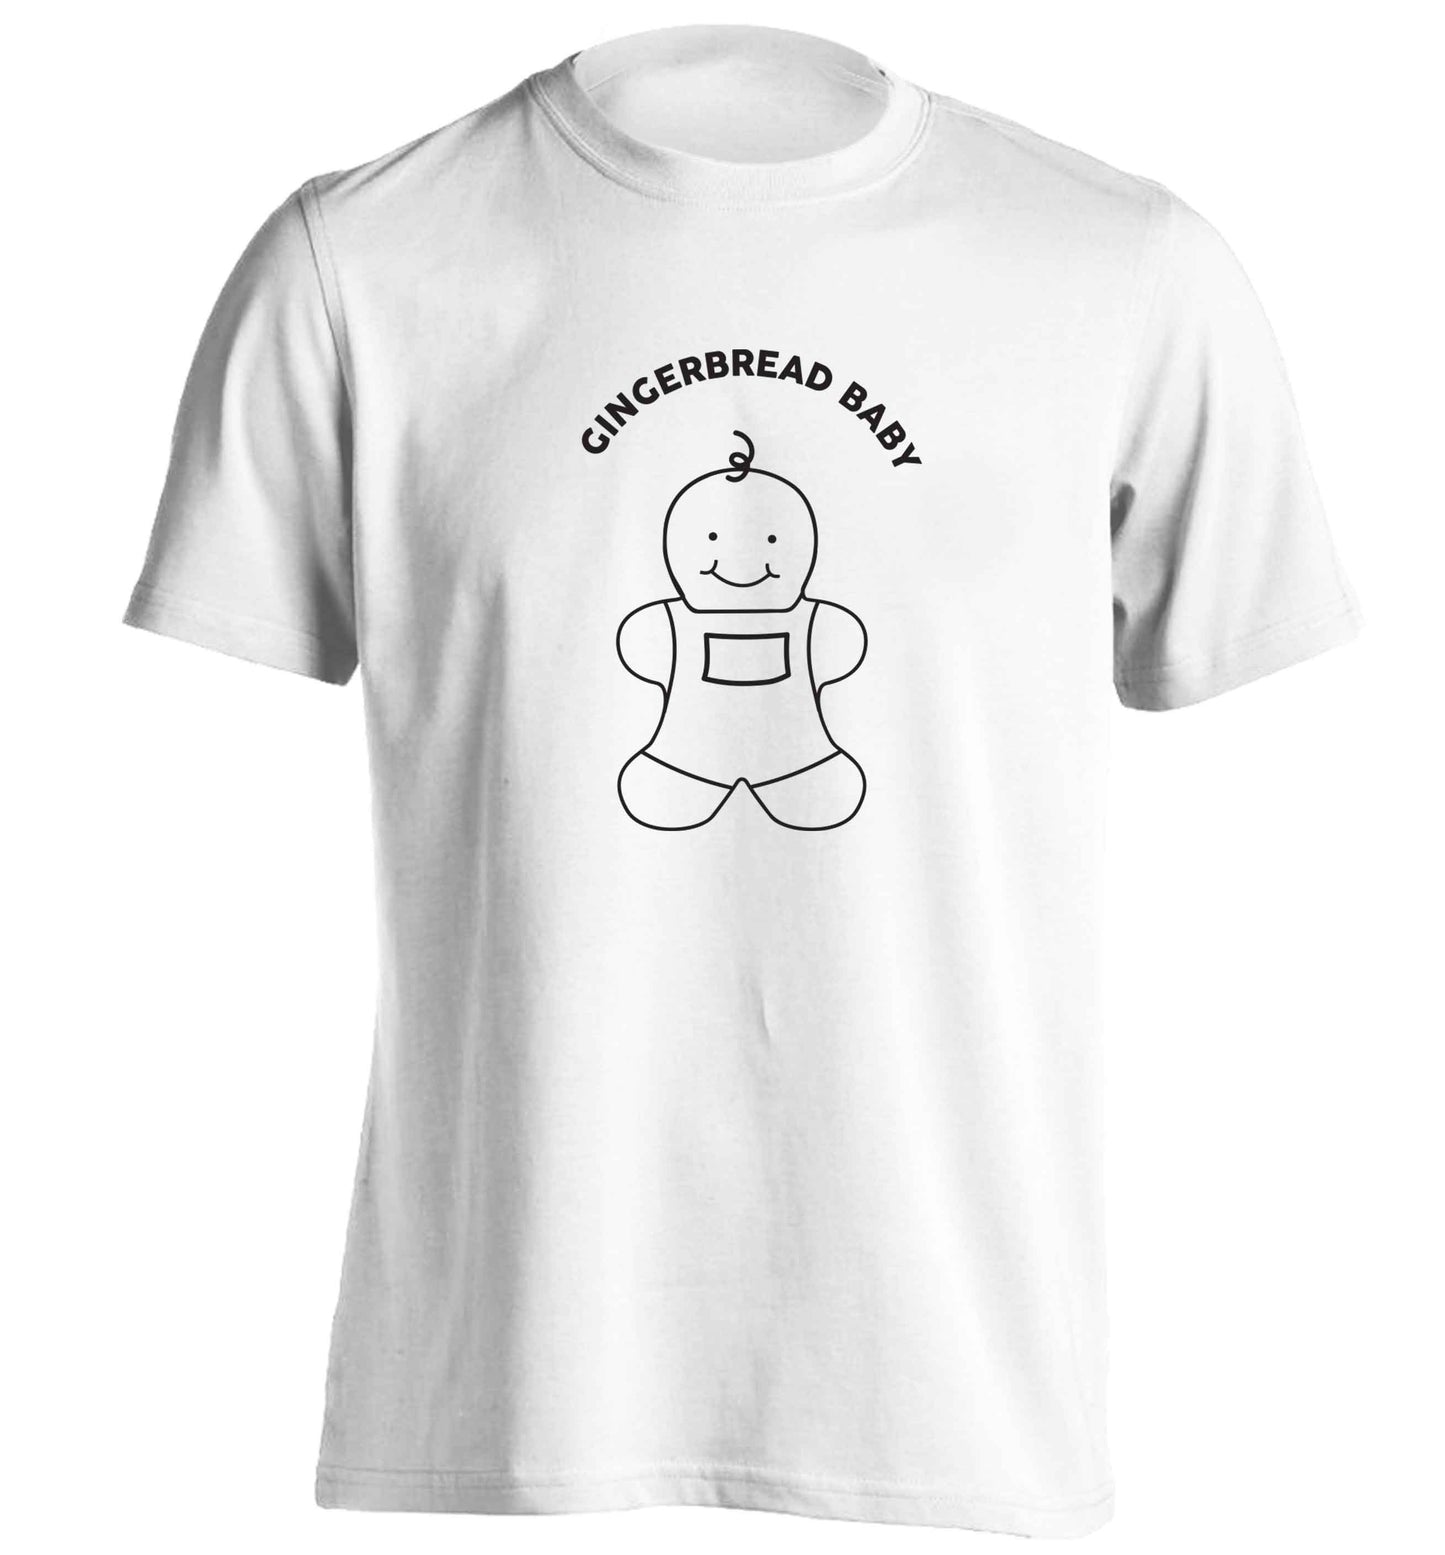 Gingerbread baby adults unisex white Tshirt 2XL